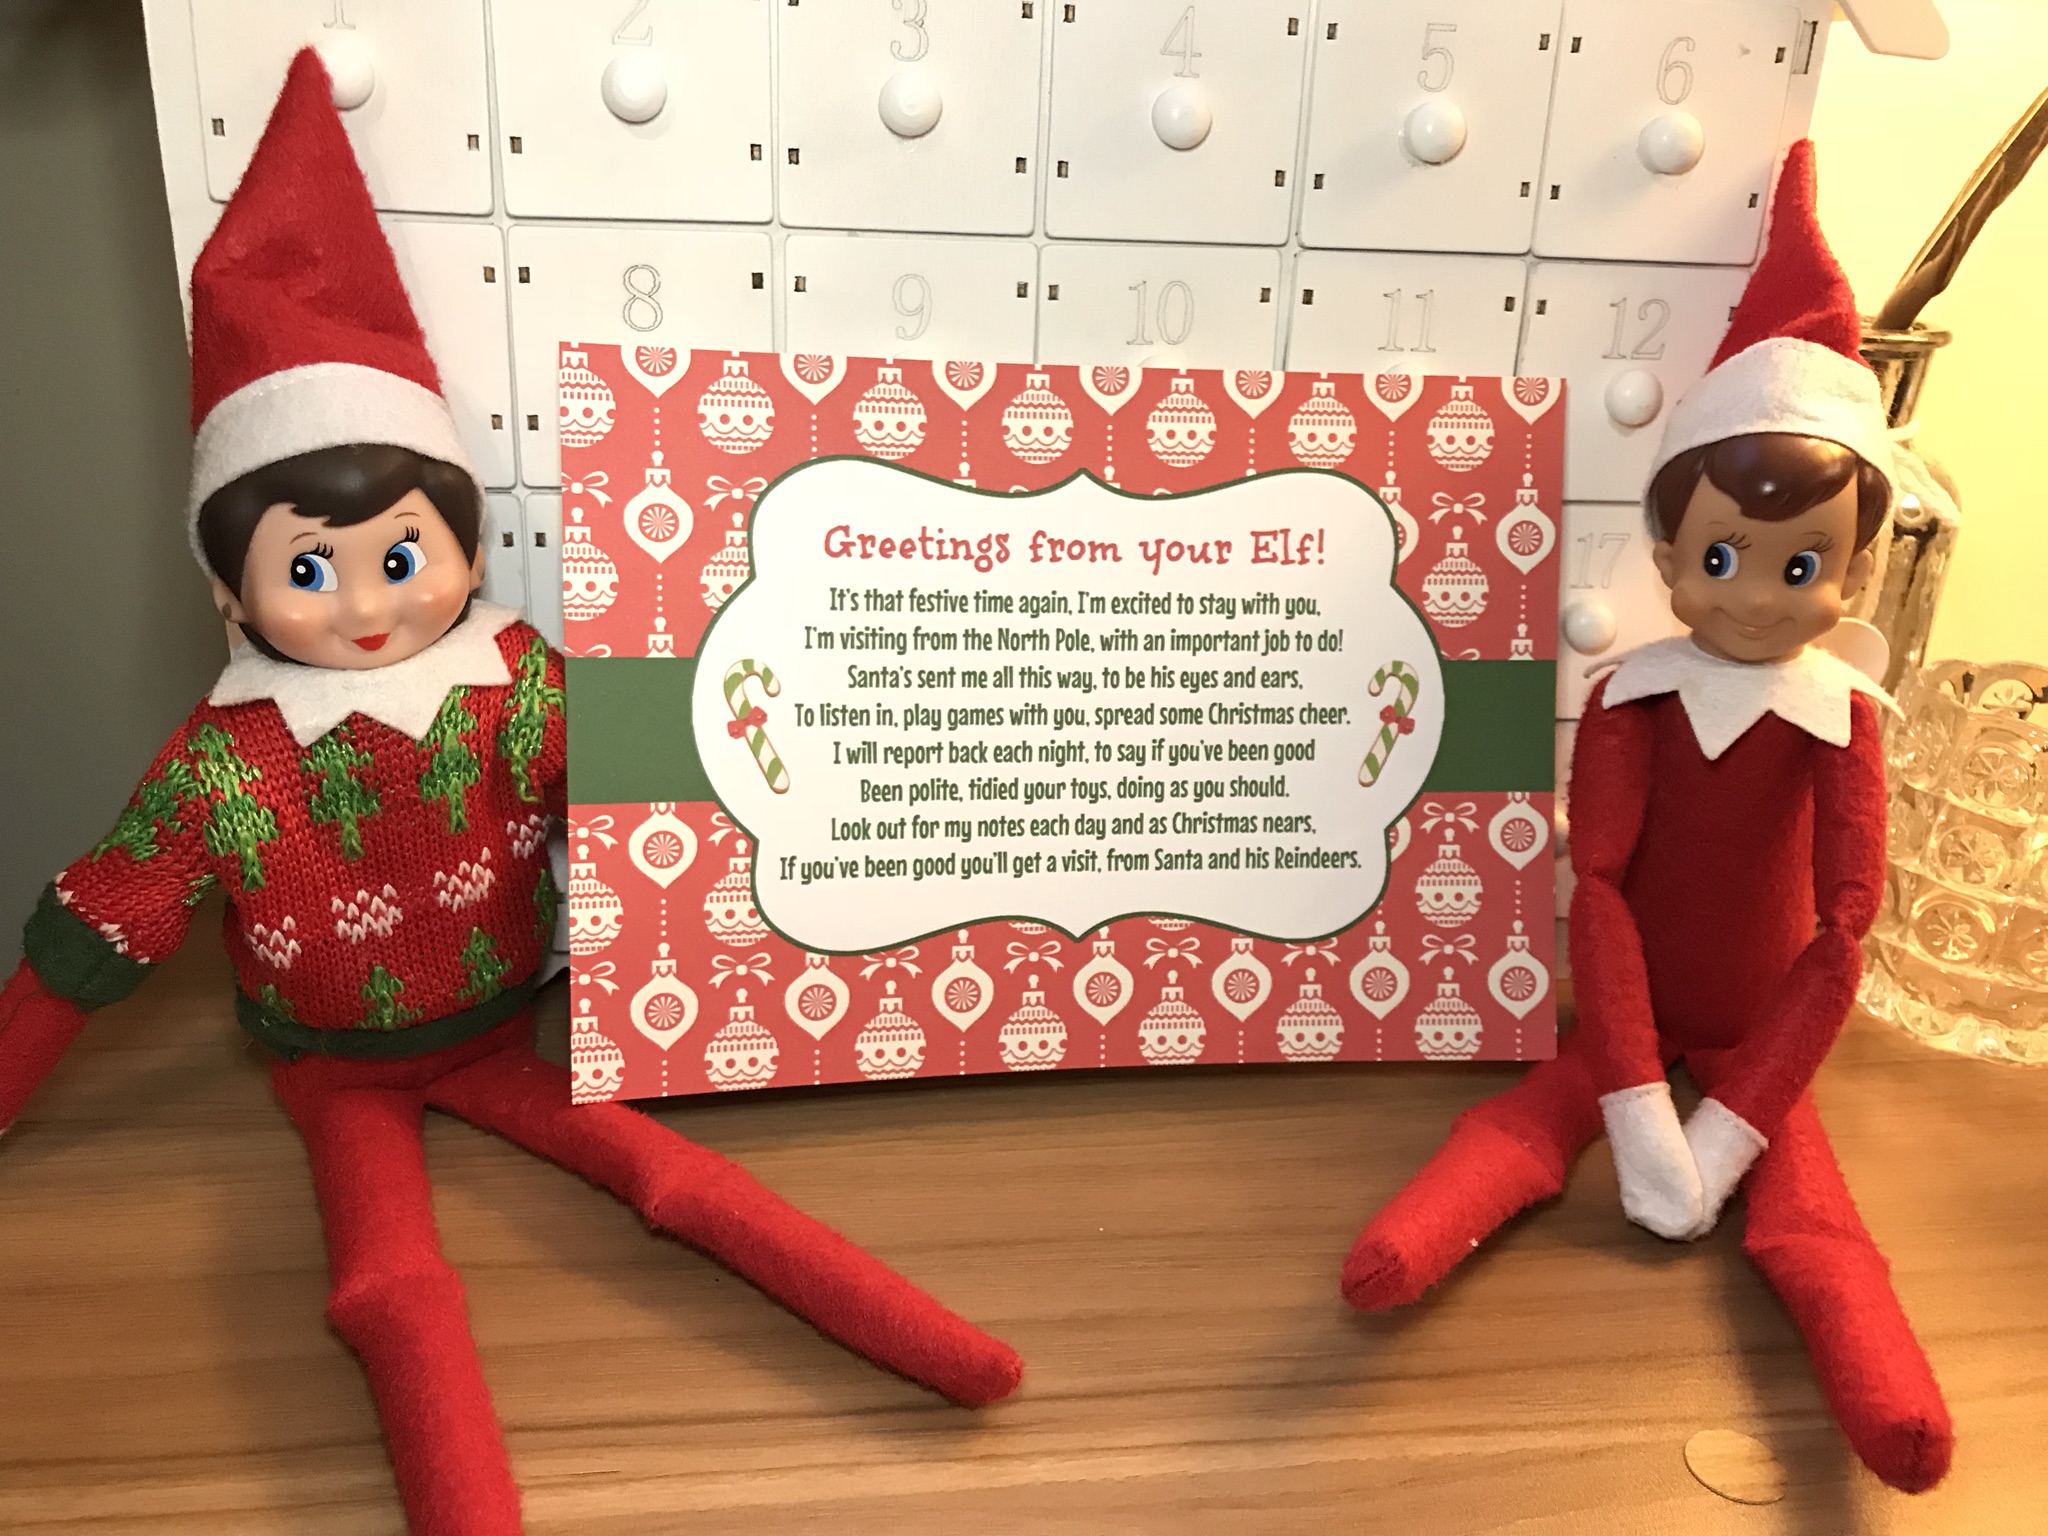 36 days of elves and santa